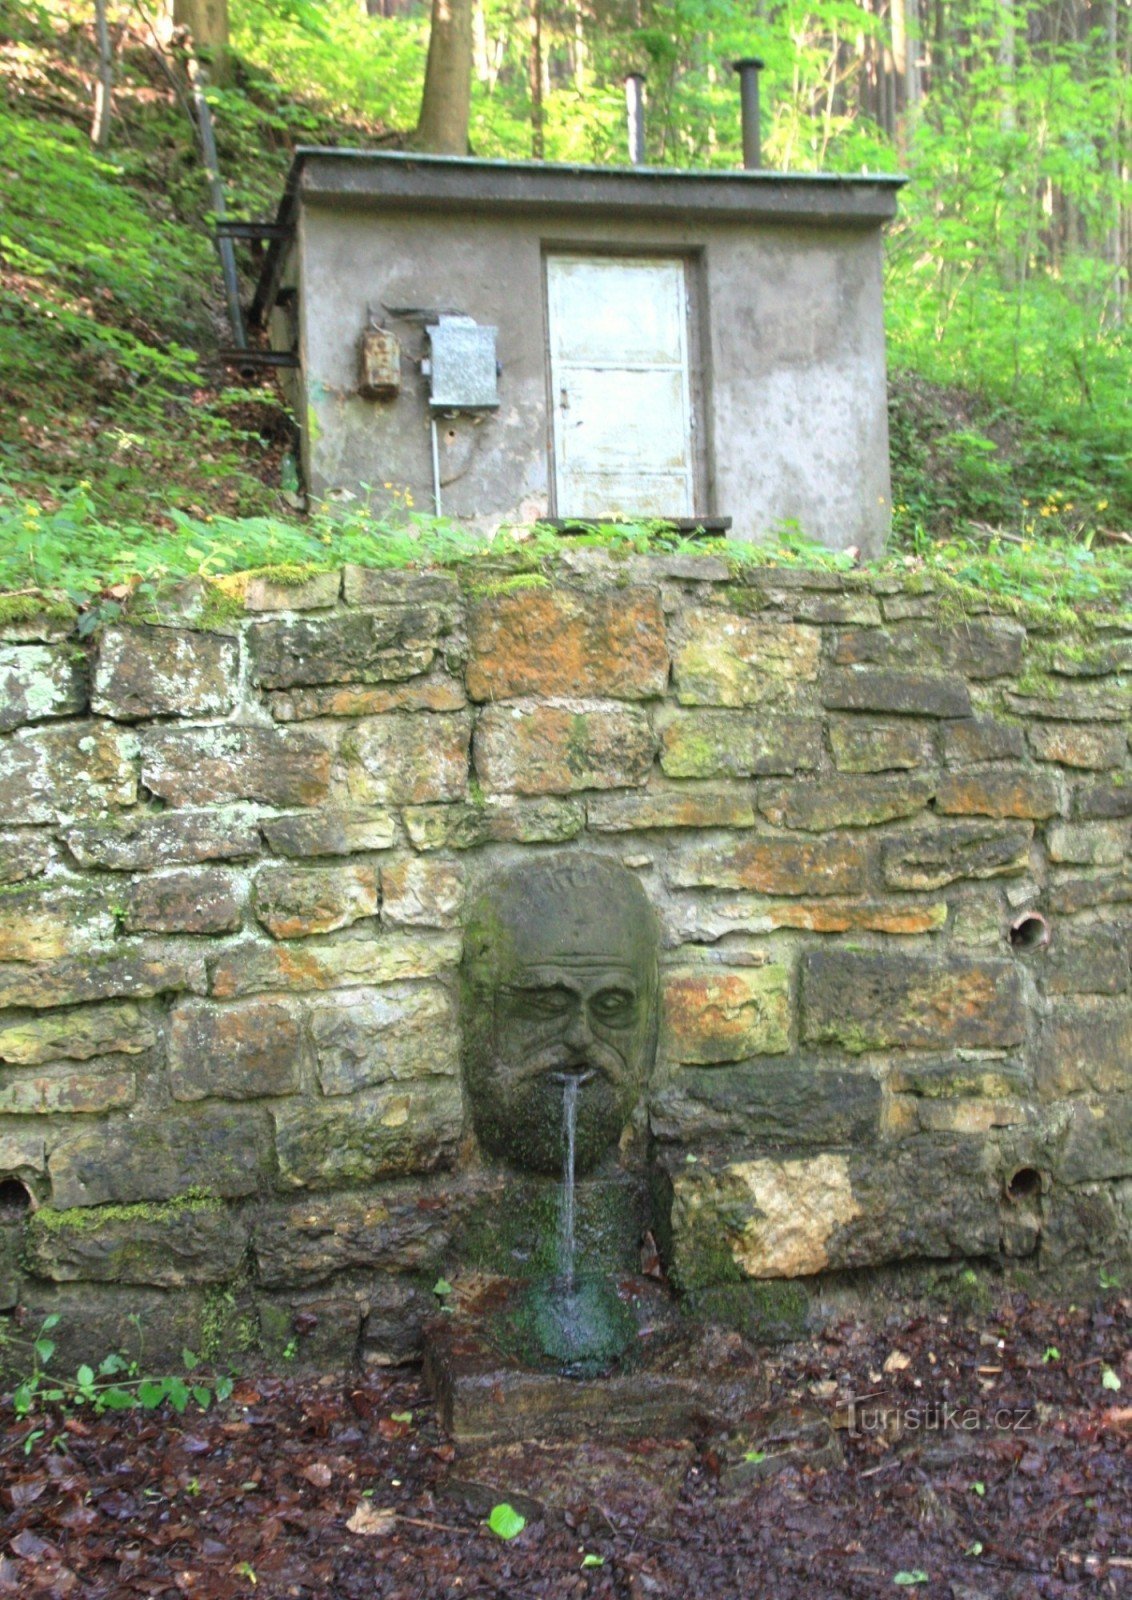 A reservoir with an overflow of the hermit's well